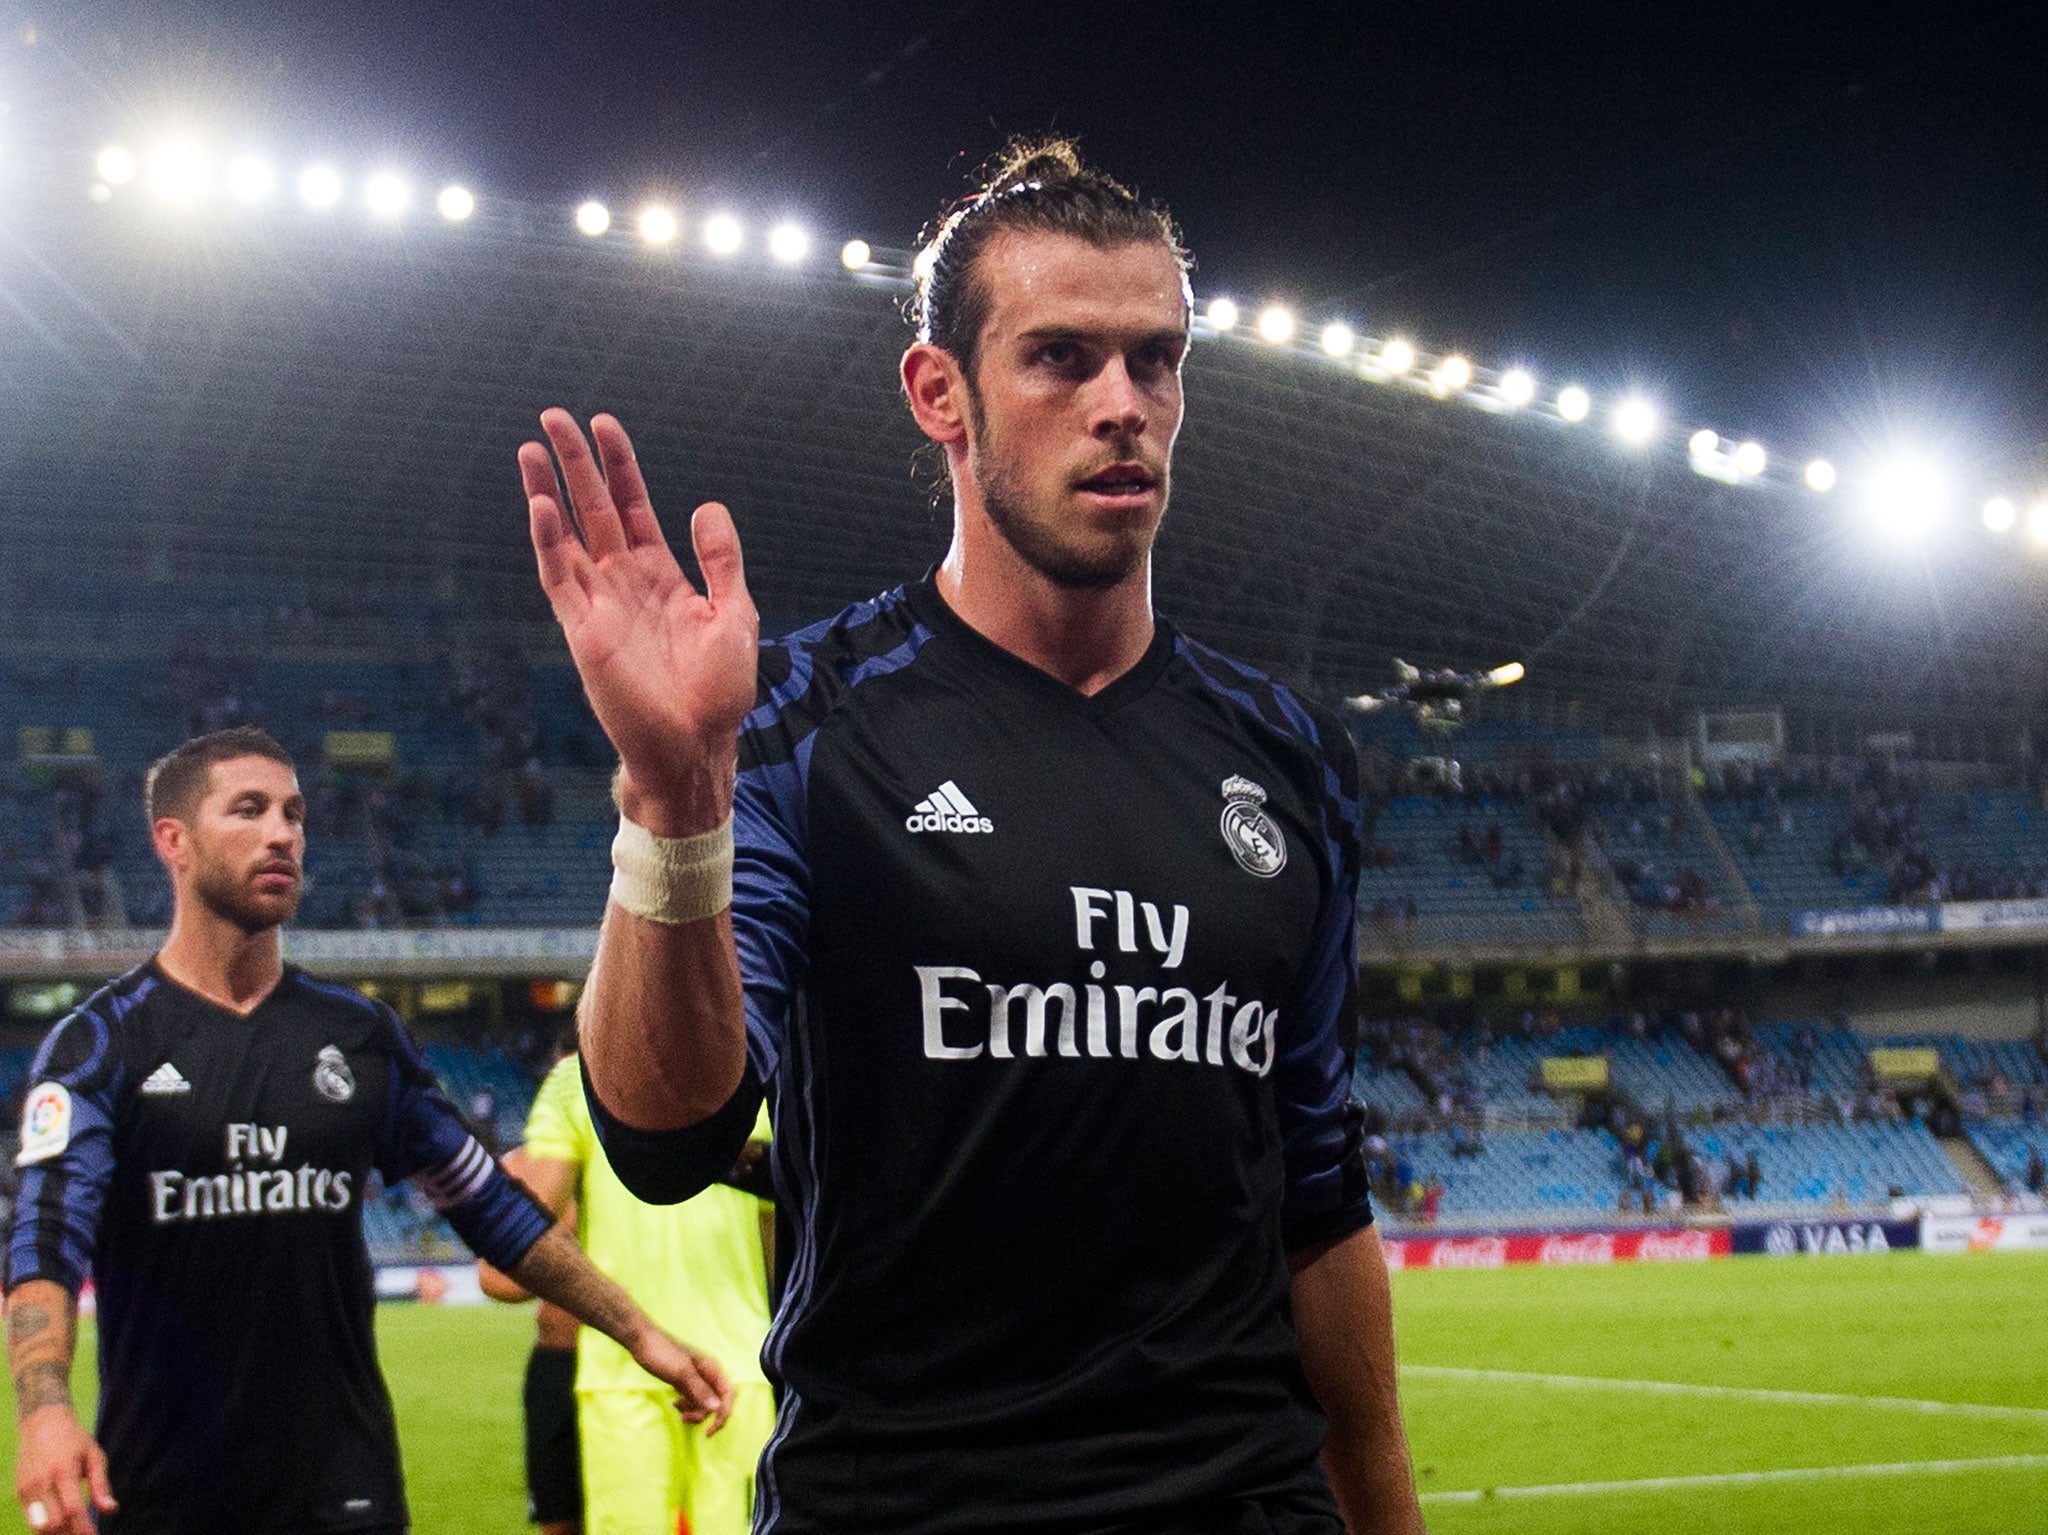 Gareth Bale has committed his future at Real Madrid until 2021